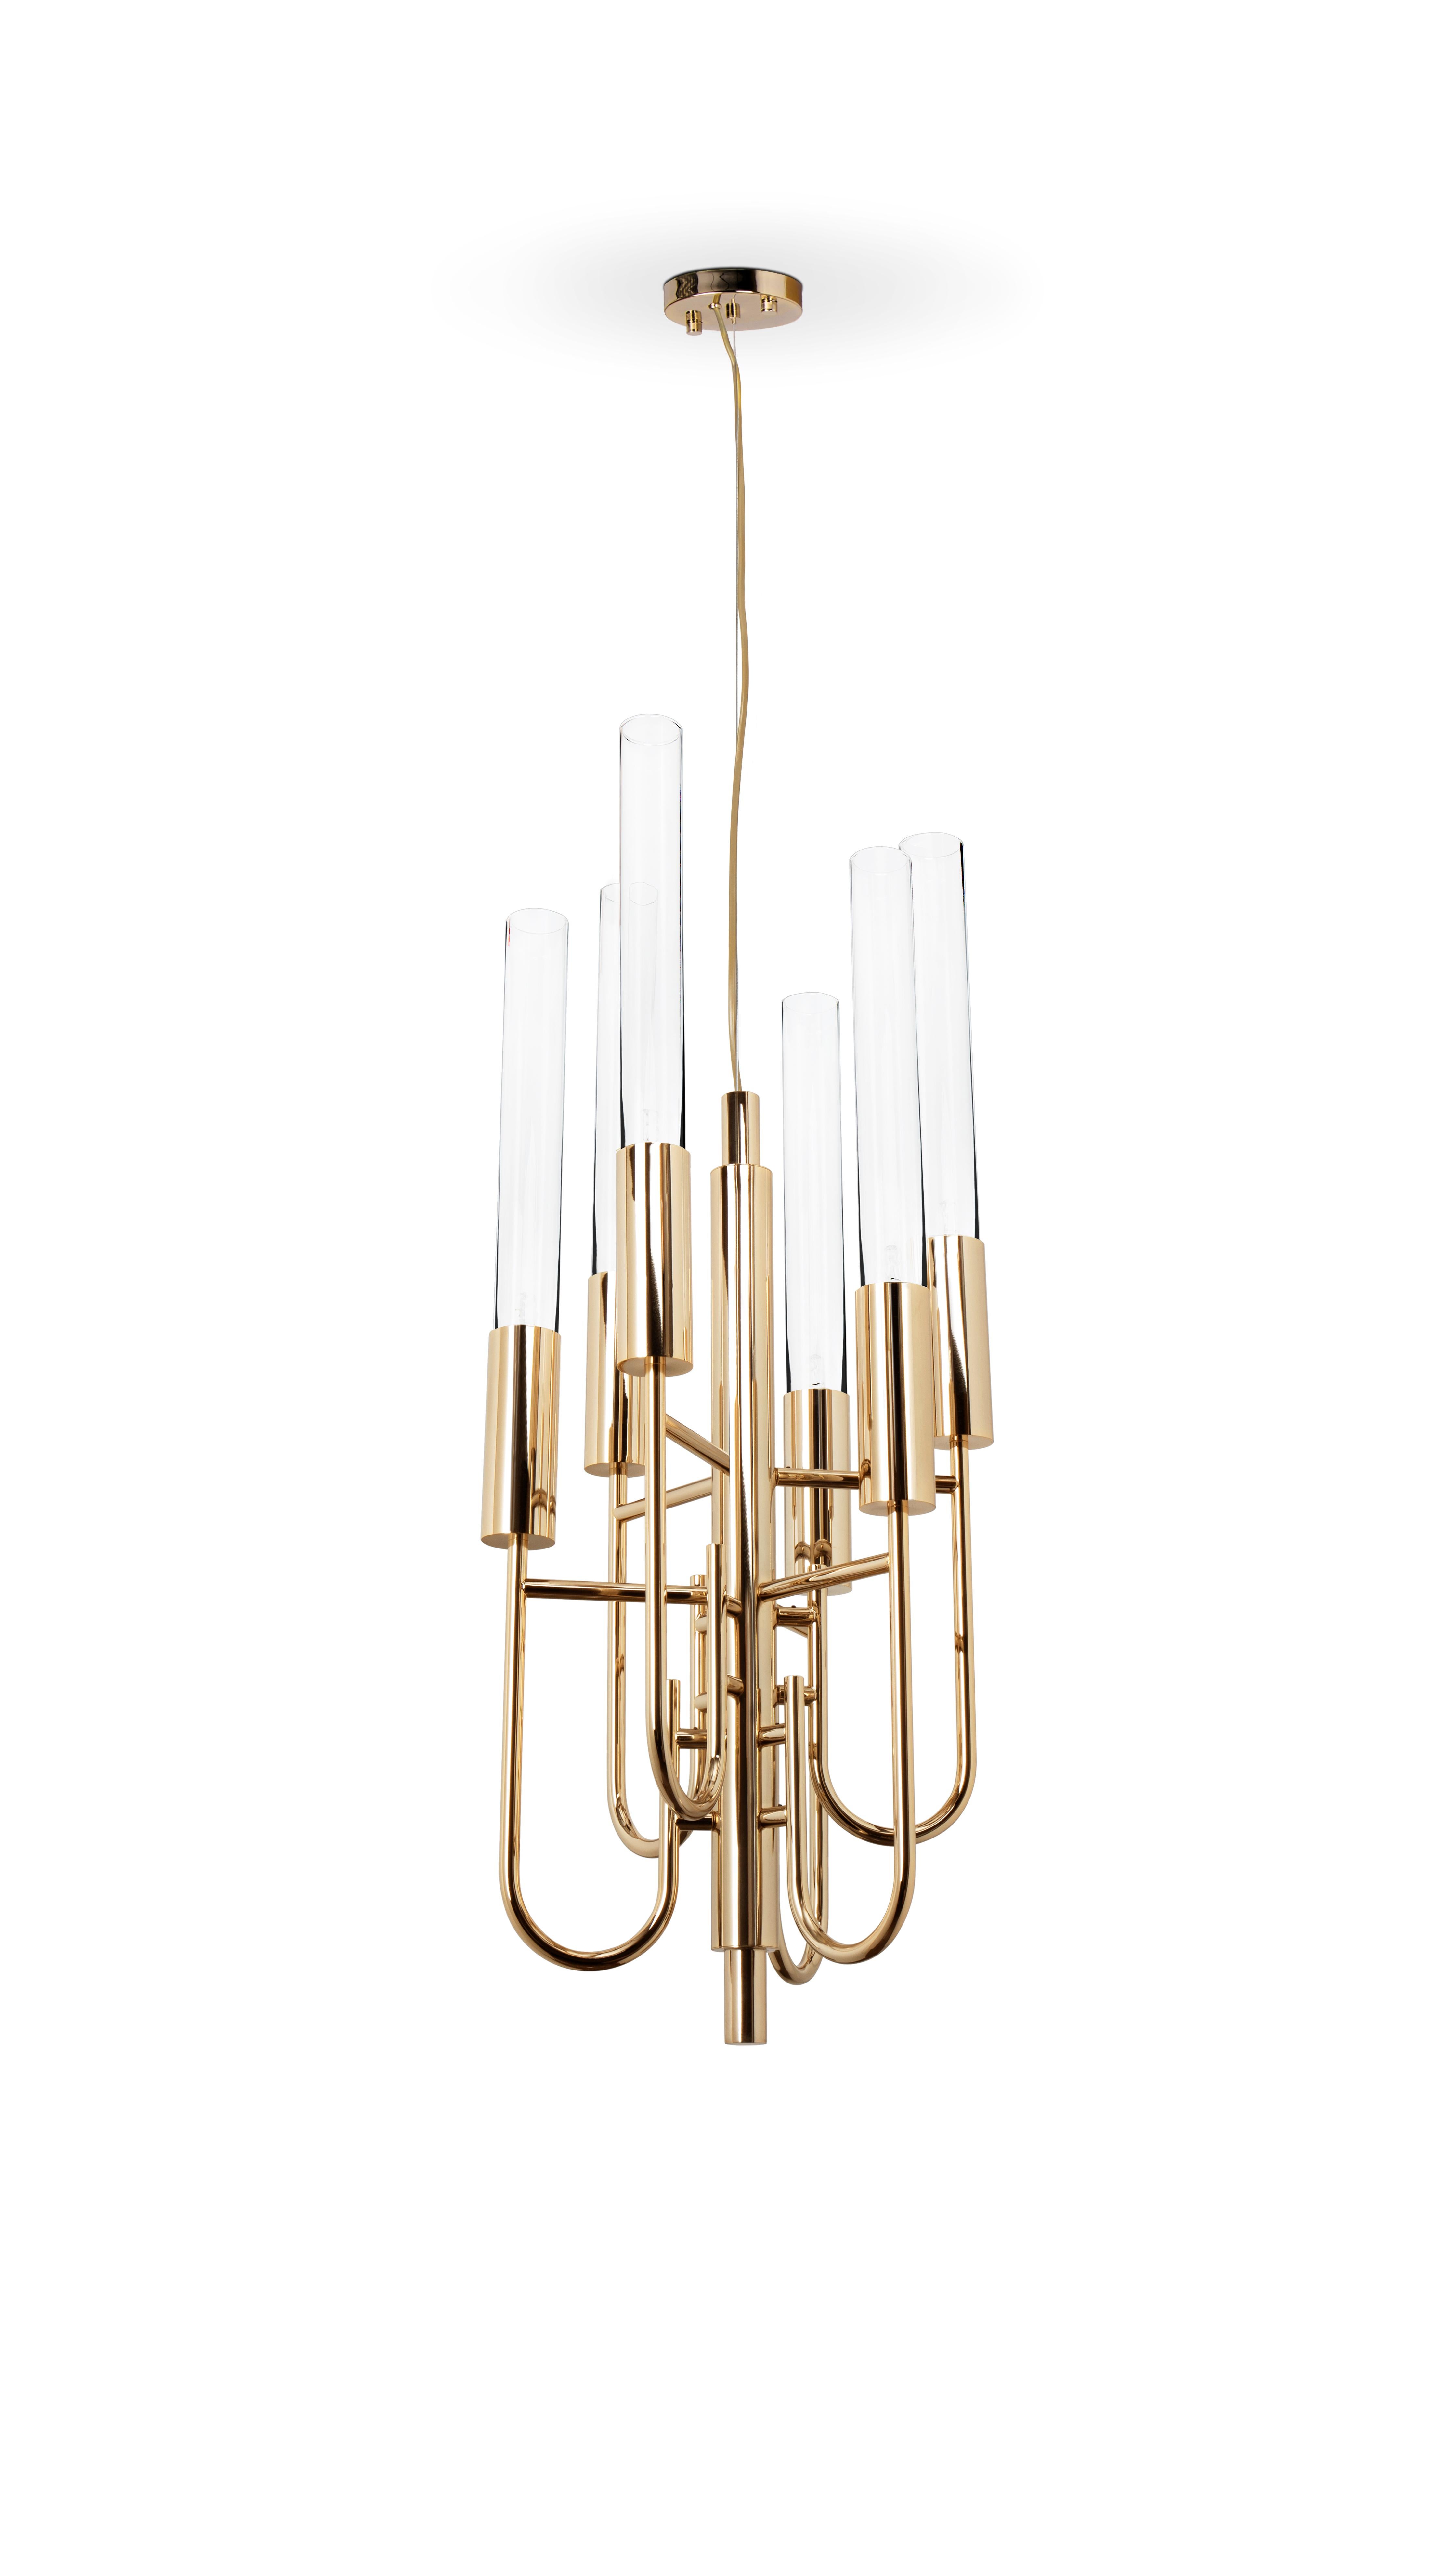 The opulent Gala pendant is a sign of times. This everlasting light fits neatly into every ambiance. A superb piece tied by a single string.

MATERIALS
Body: Brass & Crystal Glass

STANDARD FINISHES
Body: Gold plated

Lighting: 6x g9 halogen bulbs,